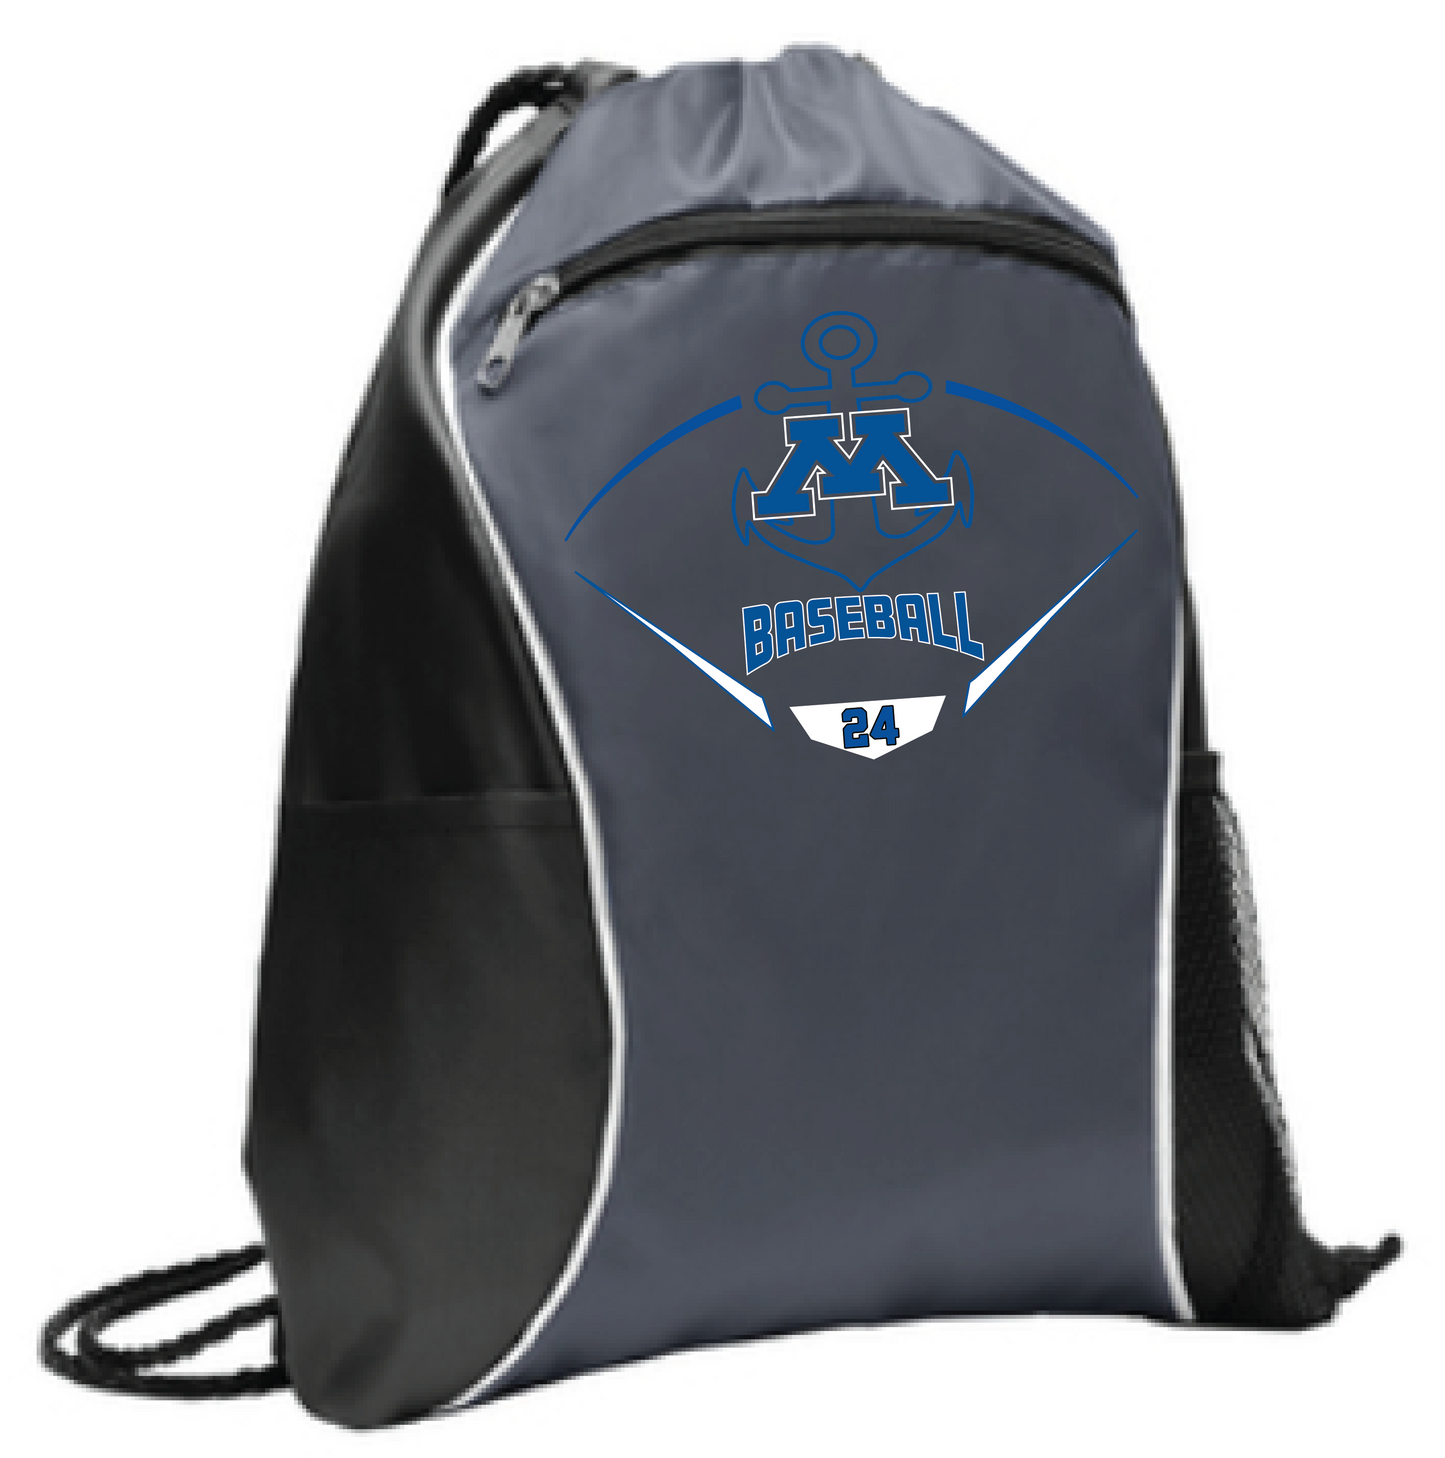 MBA Drawstring Bag With Side Pockets